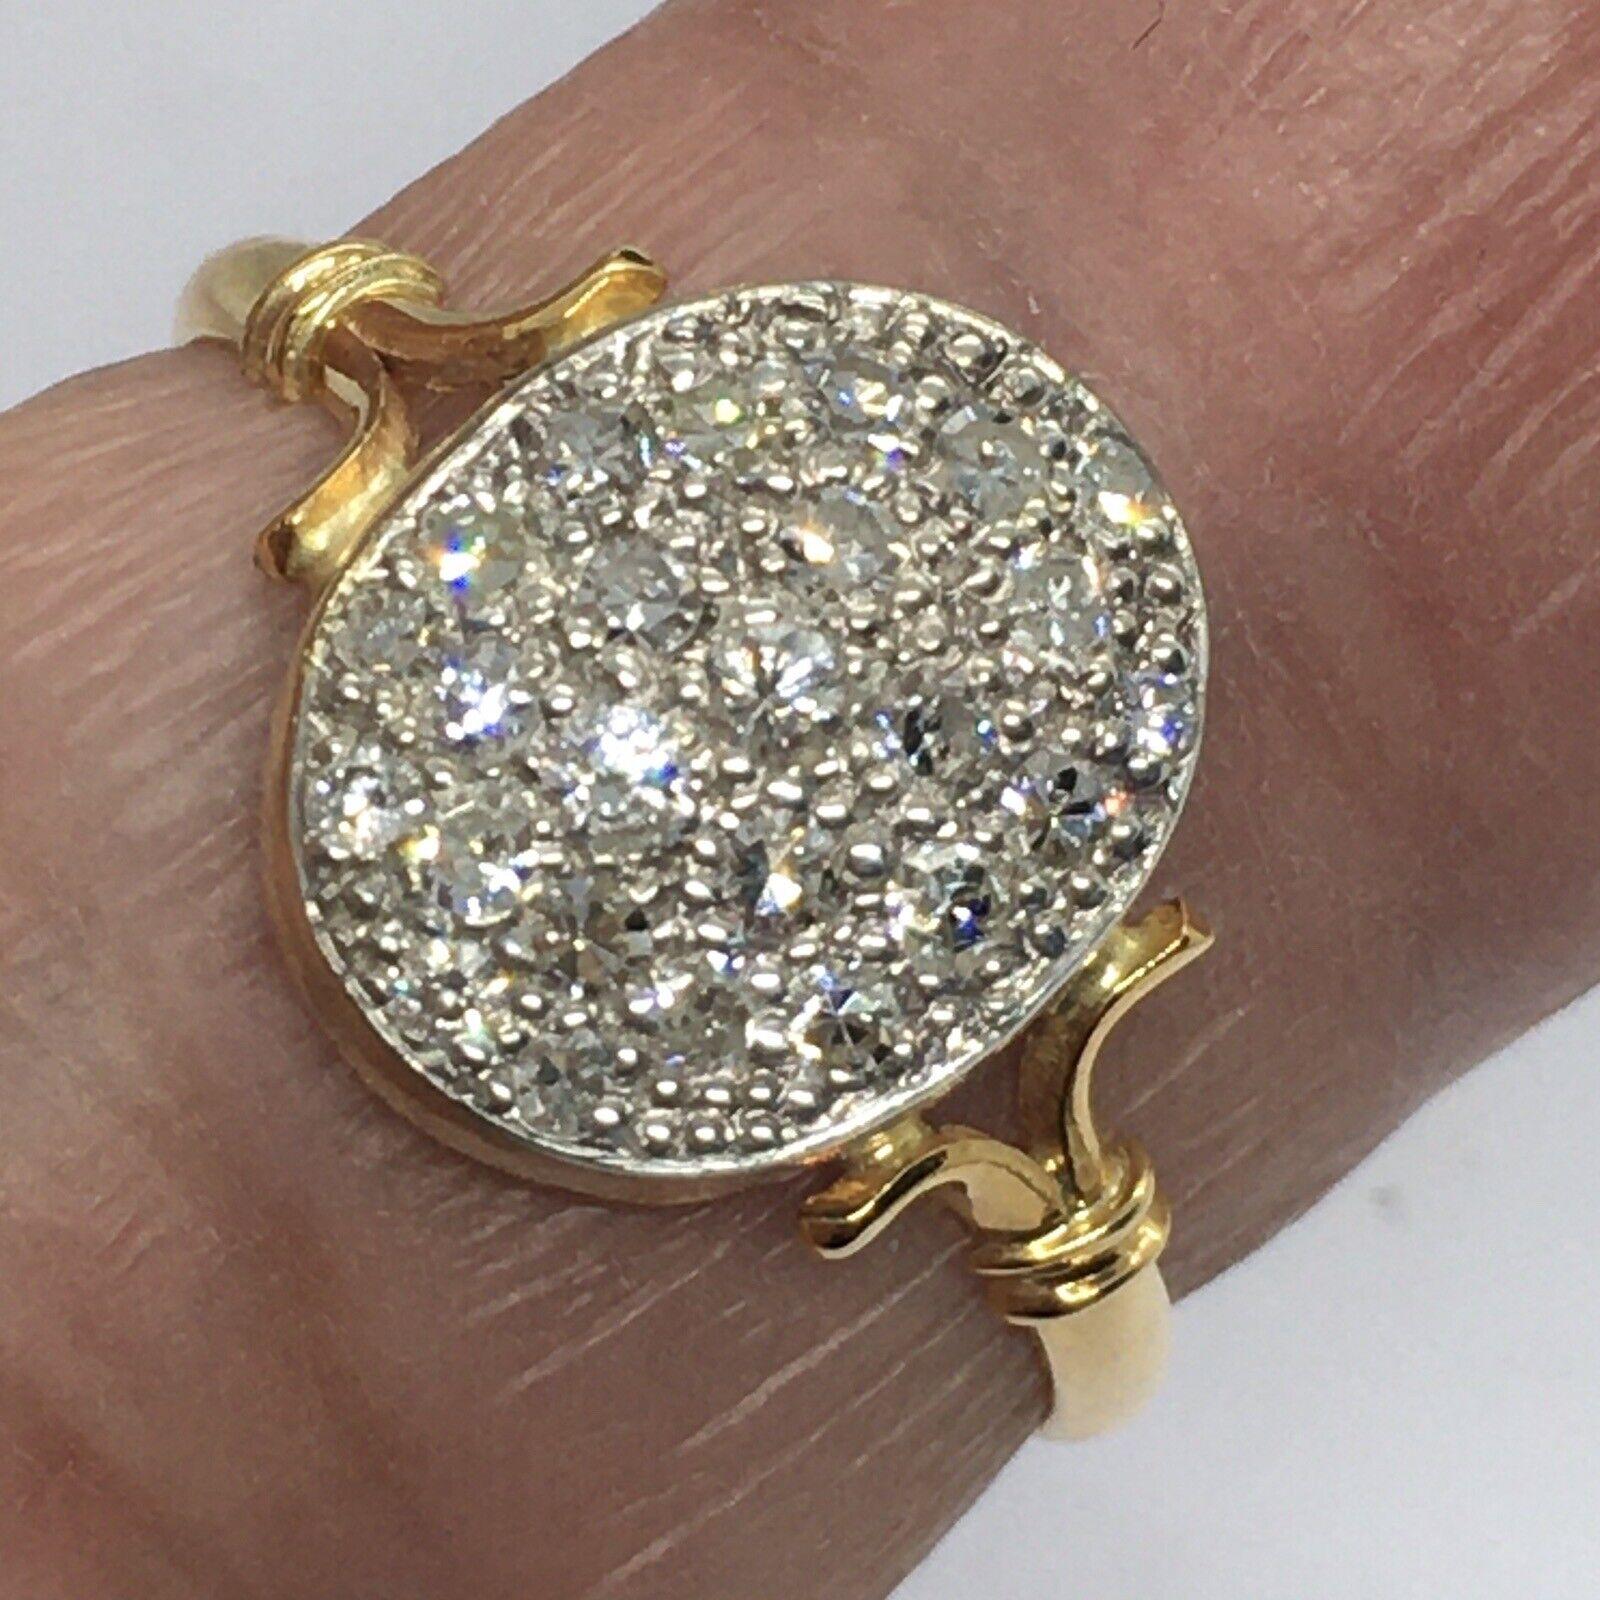 18k Yellow Gold Antique Silver Top 1/2 Carat Diamond Pave Set Ring Size 7.5 In Good Condition For Sale In Santa Monica, CA